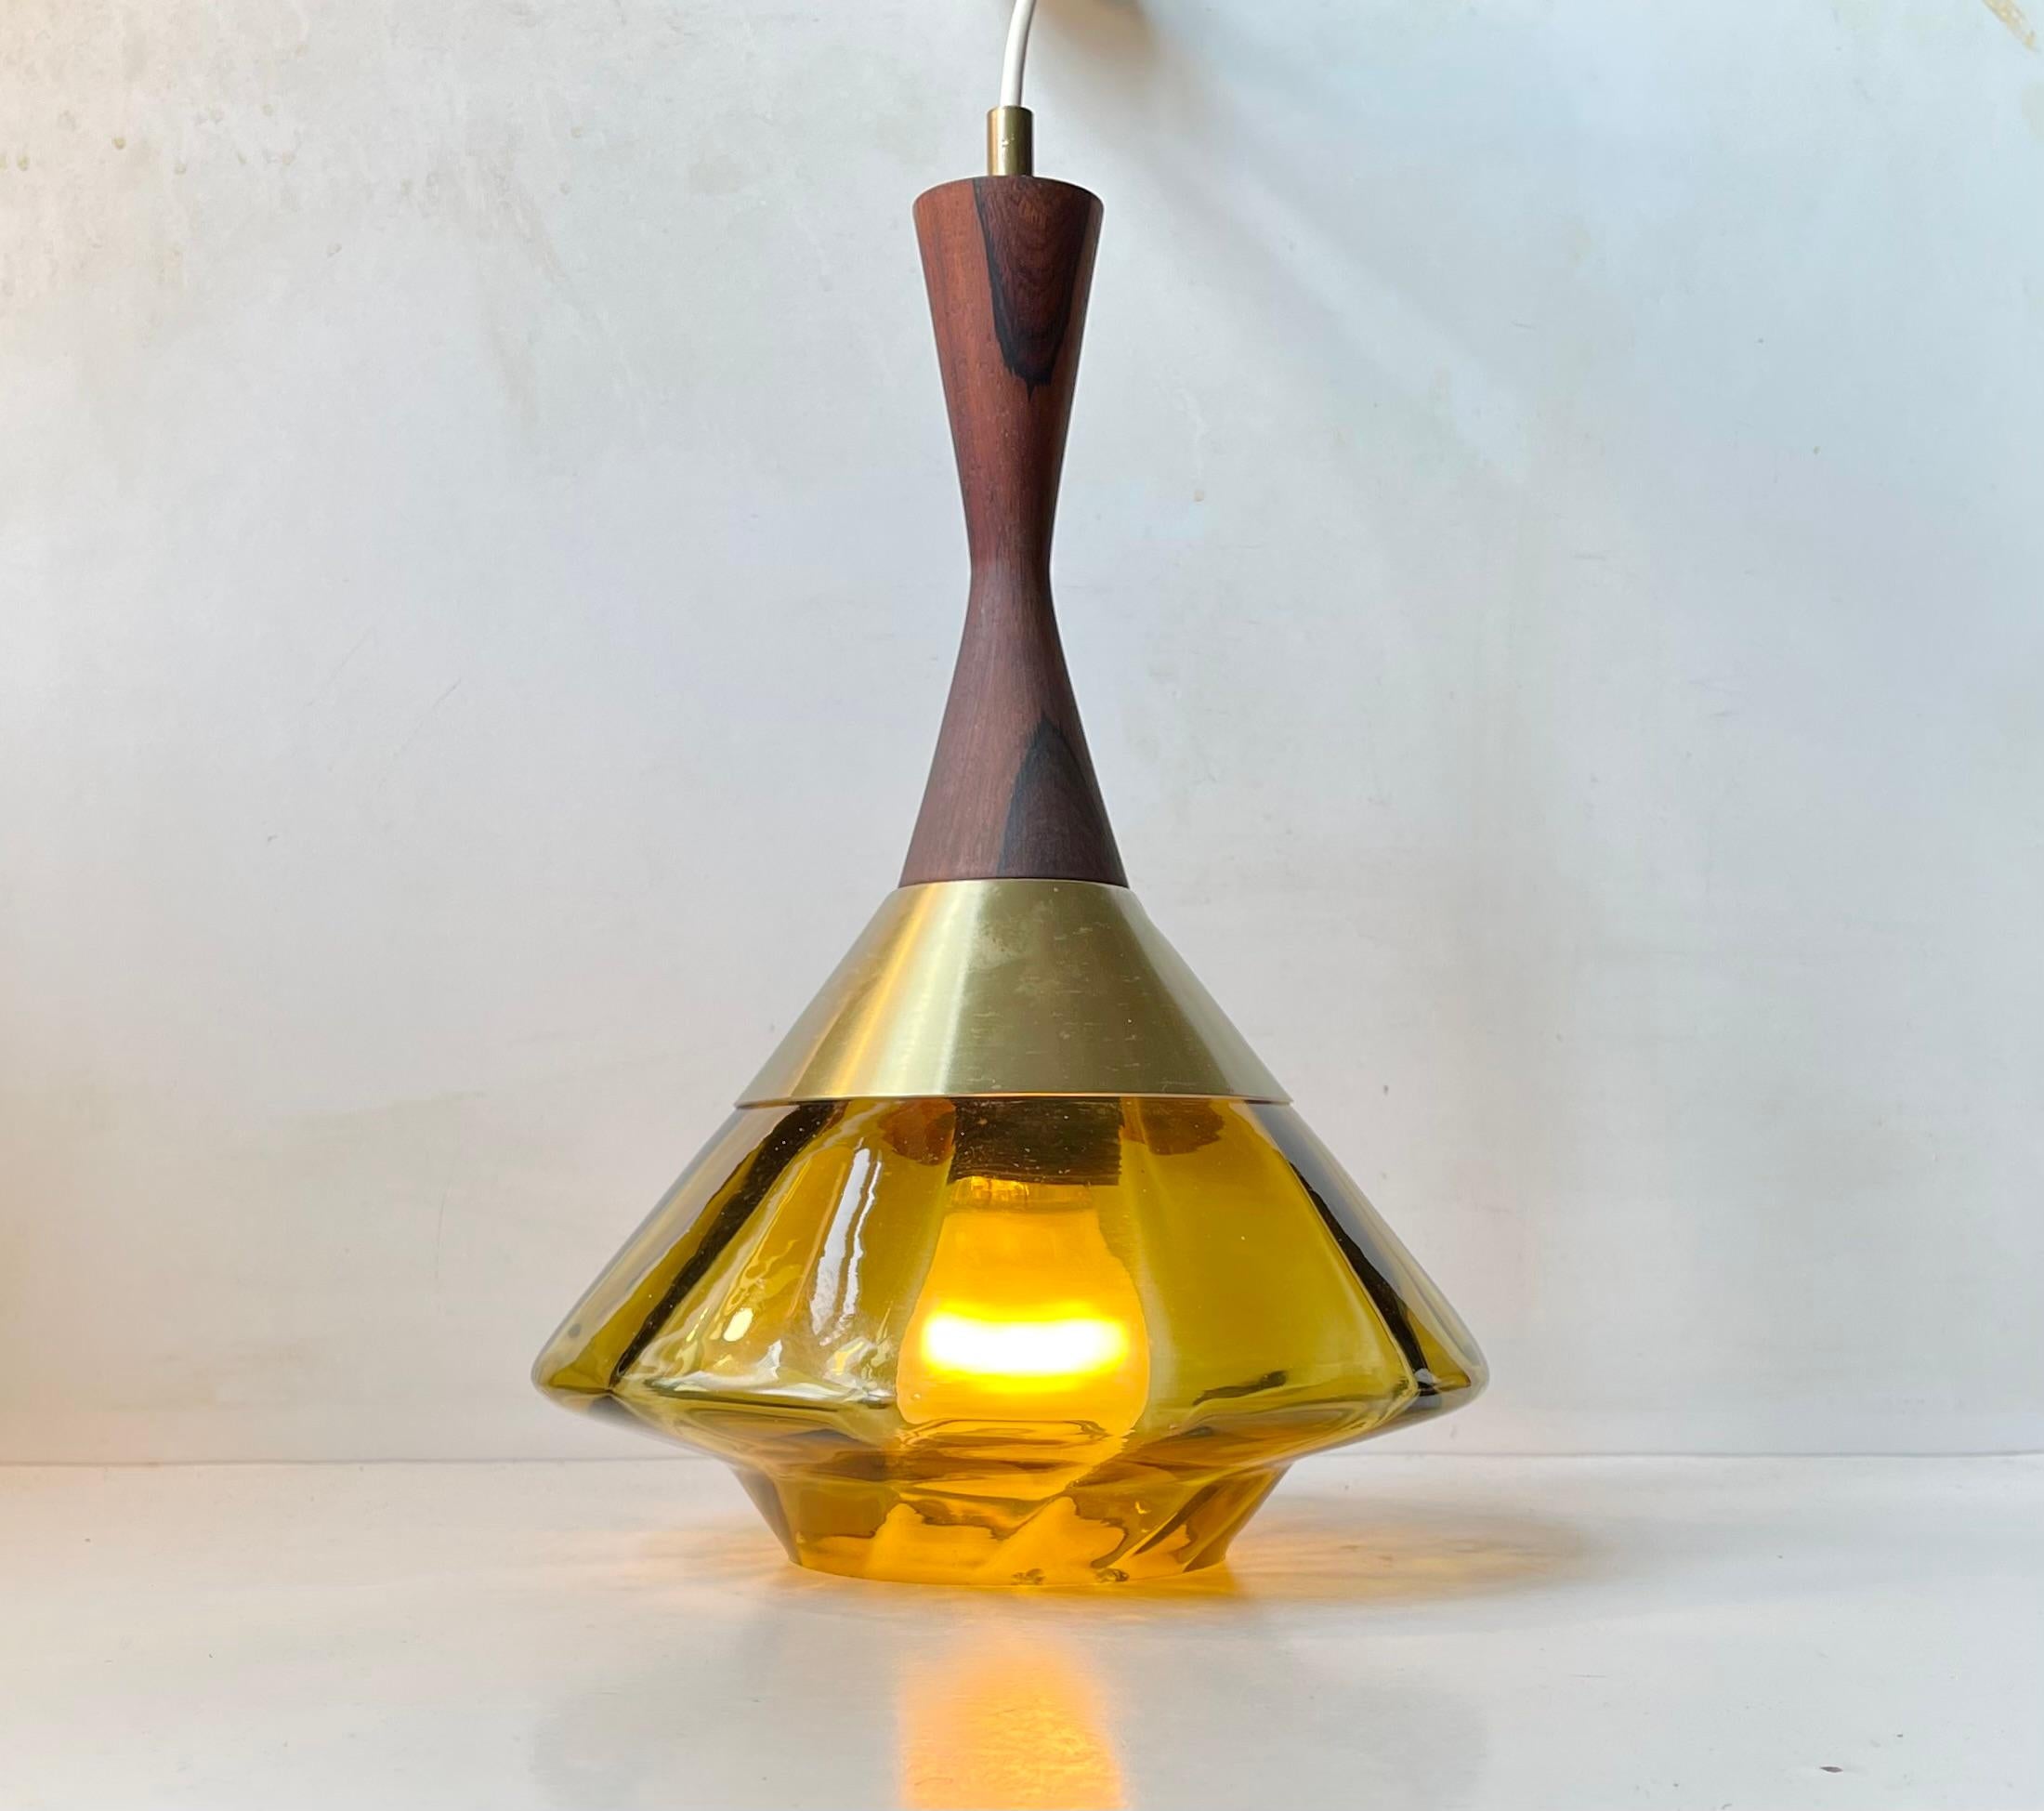 A diablo shaped hanging light with hand-blown pickle/olive green main glass shade and a top in solid rosewood set in brass-alloy aluminum. Manufactured by Orrefors in Sweden during the 1960s. It may have been designed by Carl Fagerlund (uncatalogued